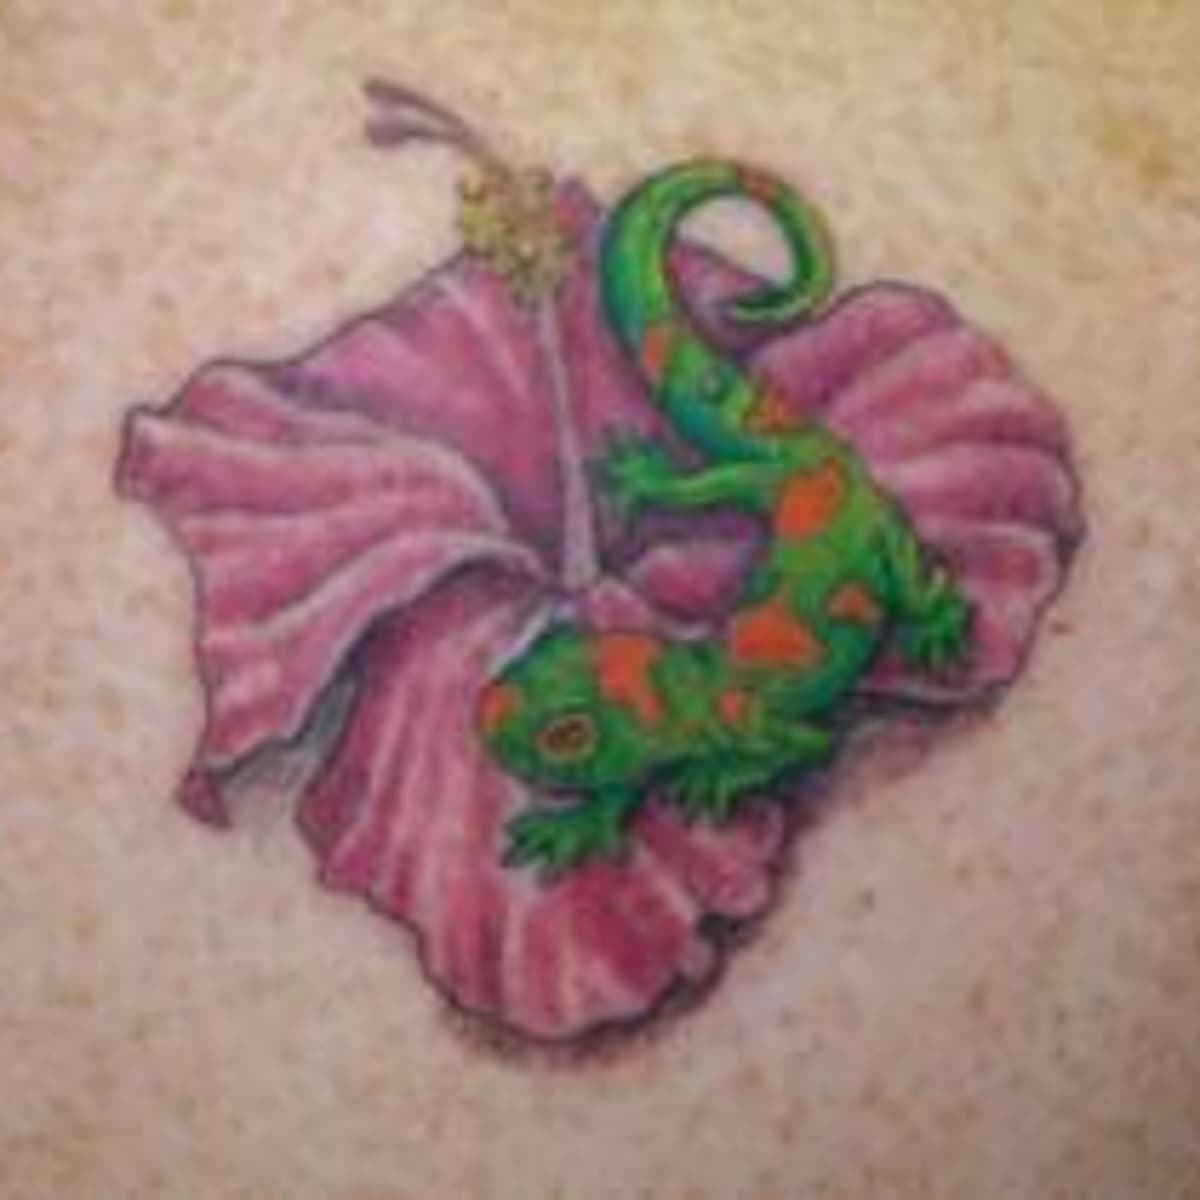 101 Amazing Lizard Tattoo Designs You Must See 